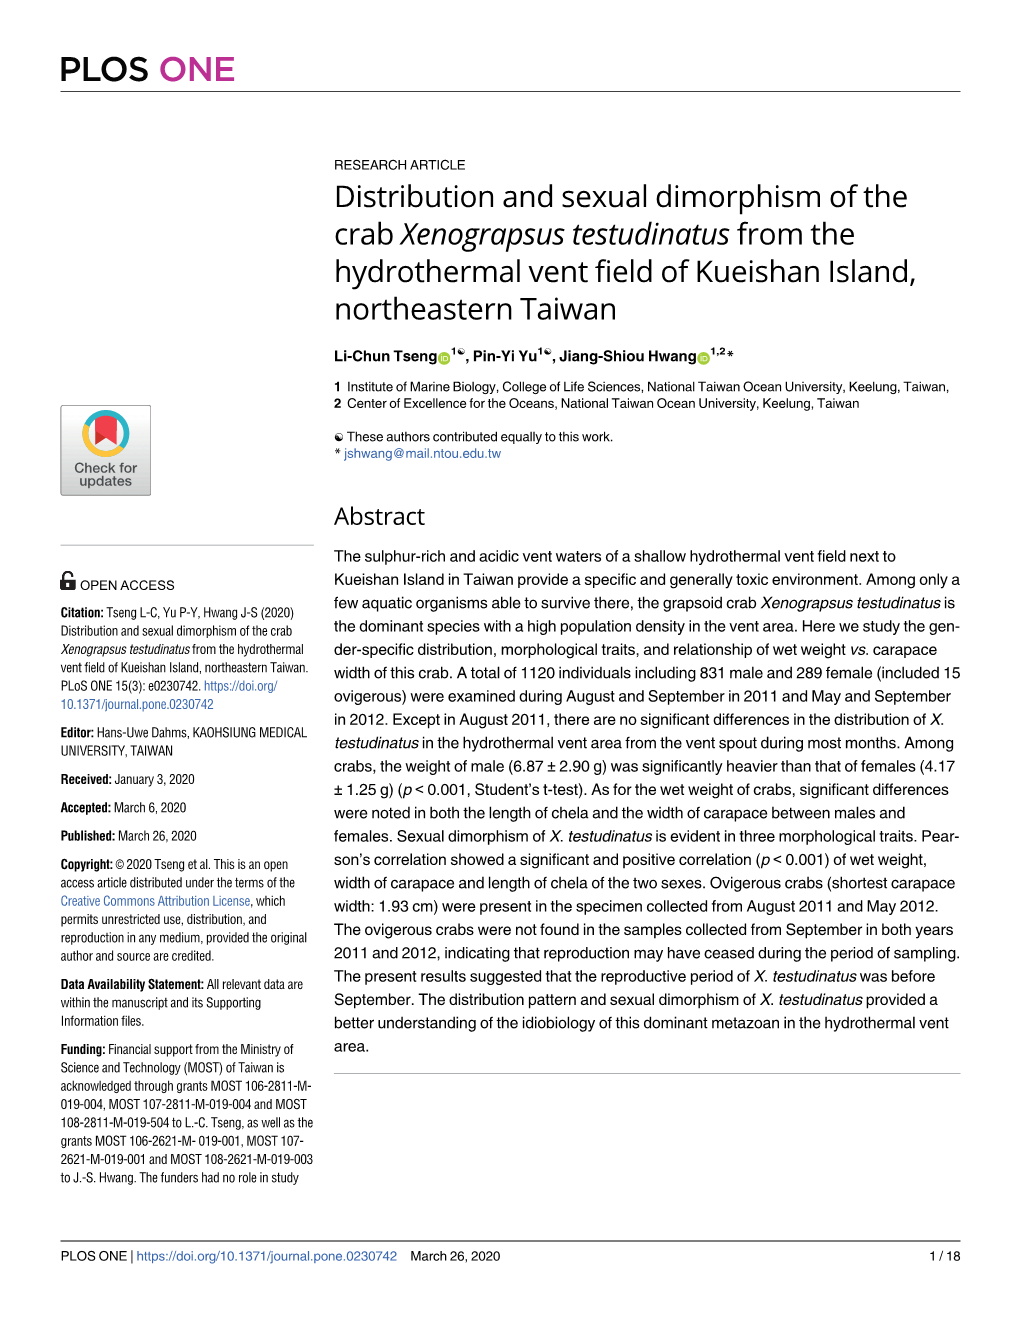 Distribution and Sexual Dimorphism of the Crab Xenograpsus Testudinatus from the Hydrothermal Vent Field of Kueishan Island, Northeastern Taiwan